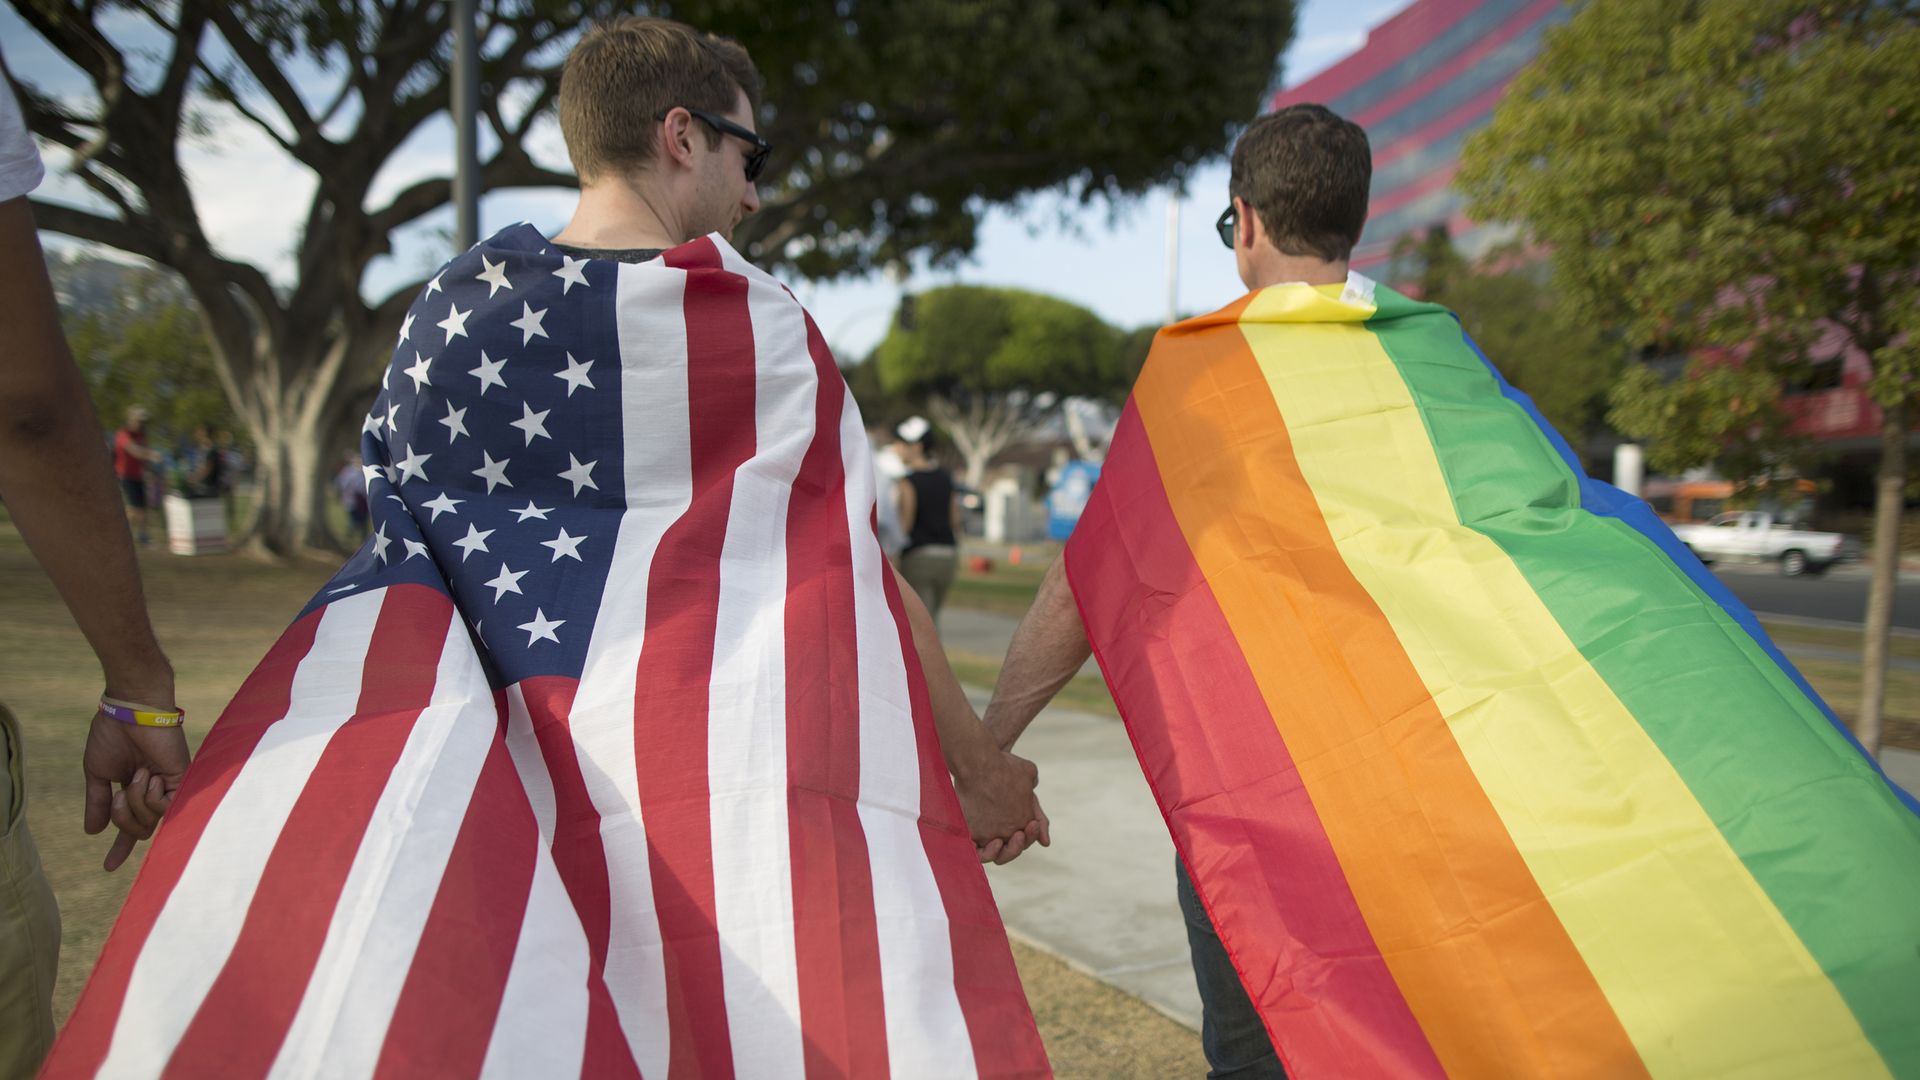 Two men, one wearing an American flag and one wearing a LGBTQ rainbow flag, hold hands.